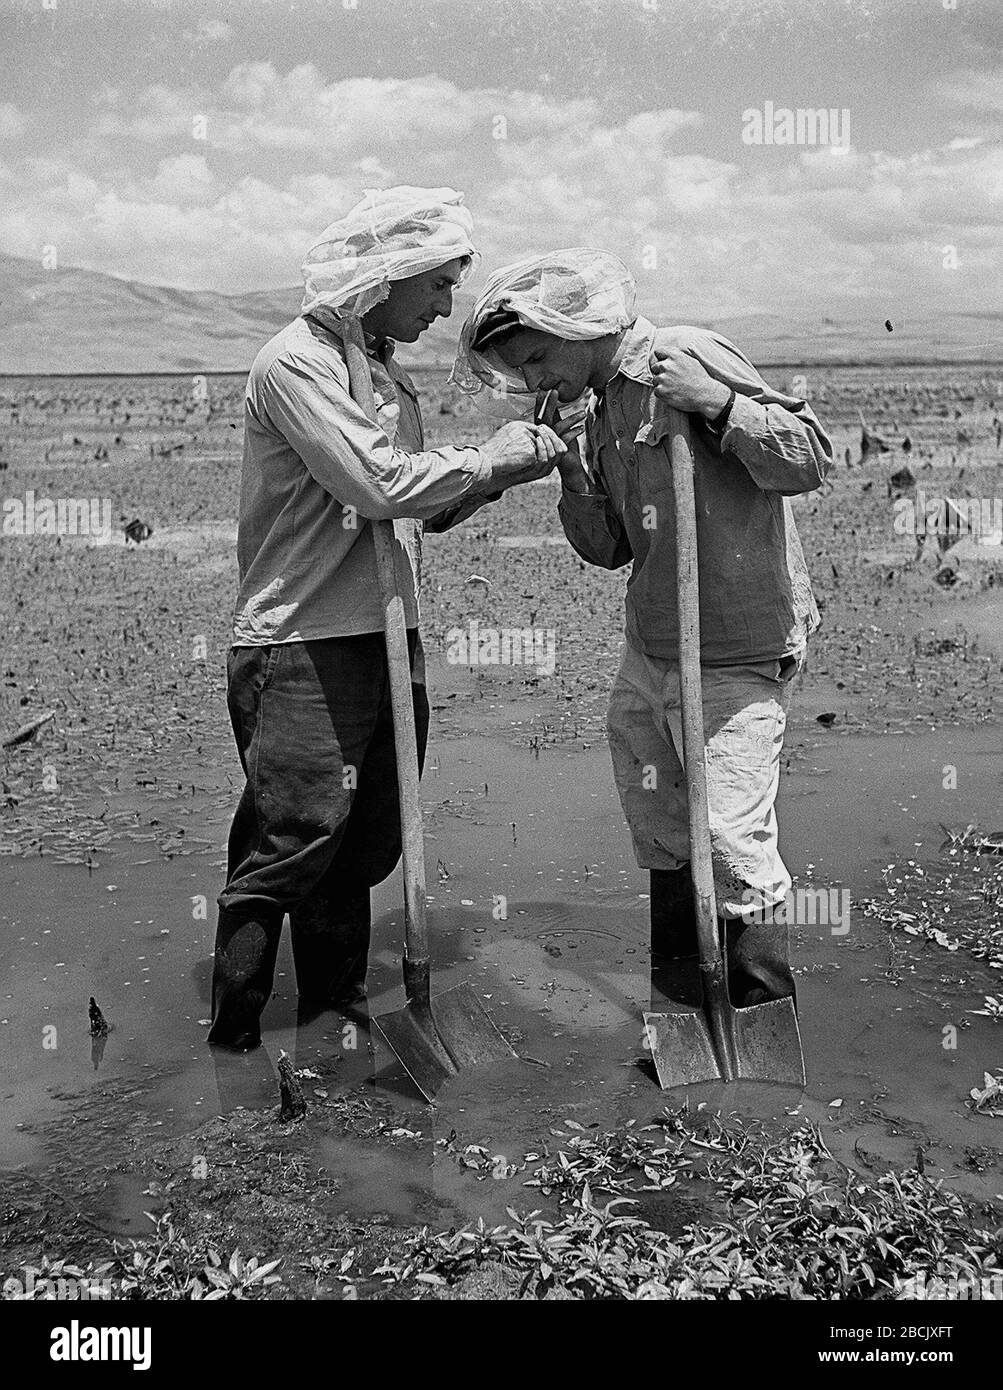 English Members Of Kibbutz Amir Their Heads Covered With Netting Against Malaria Flies Working In The Hule Swamps O U I O U O E O Ss O E I U O I E I O U E E O I O I U I E O U I U